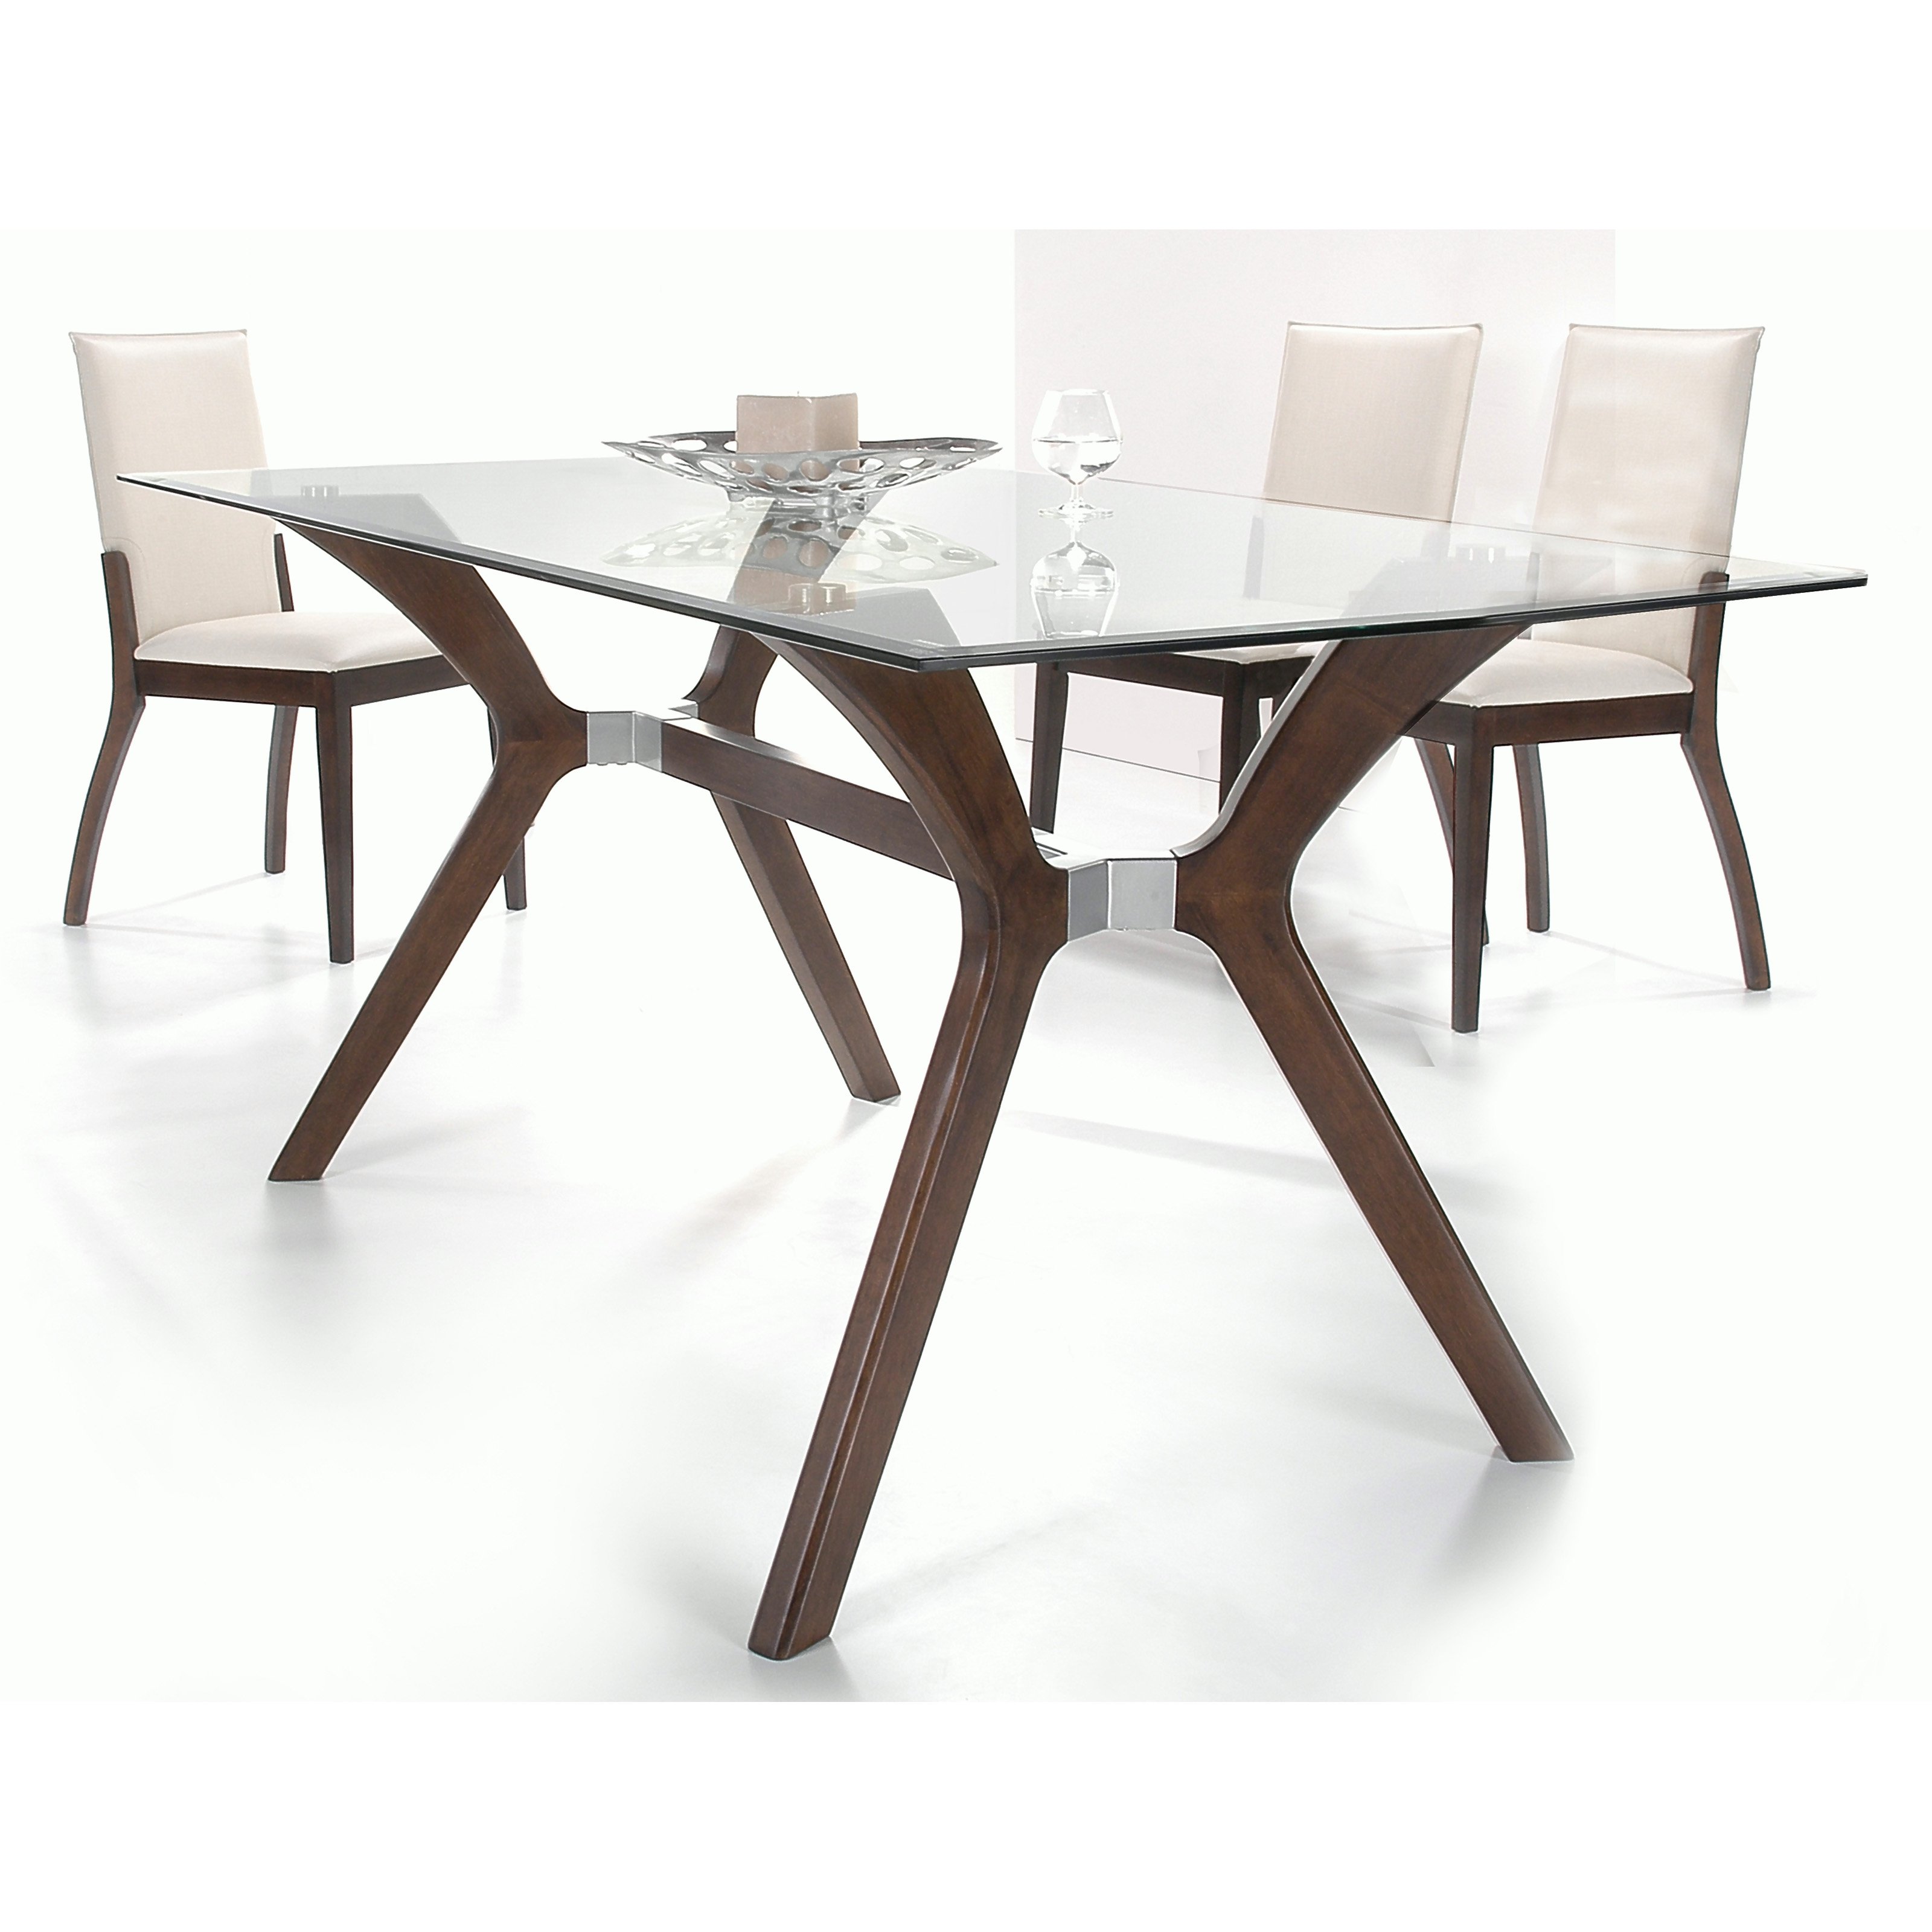 chintaly luisa piece rectangular dining table set master glass top room and chairs accent clearance dfs tables extra large seats oak extending sets small kitchen for spaces pieces